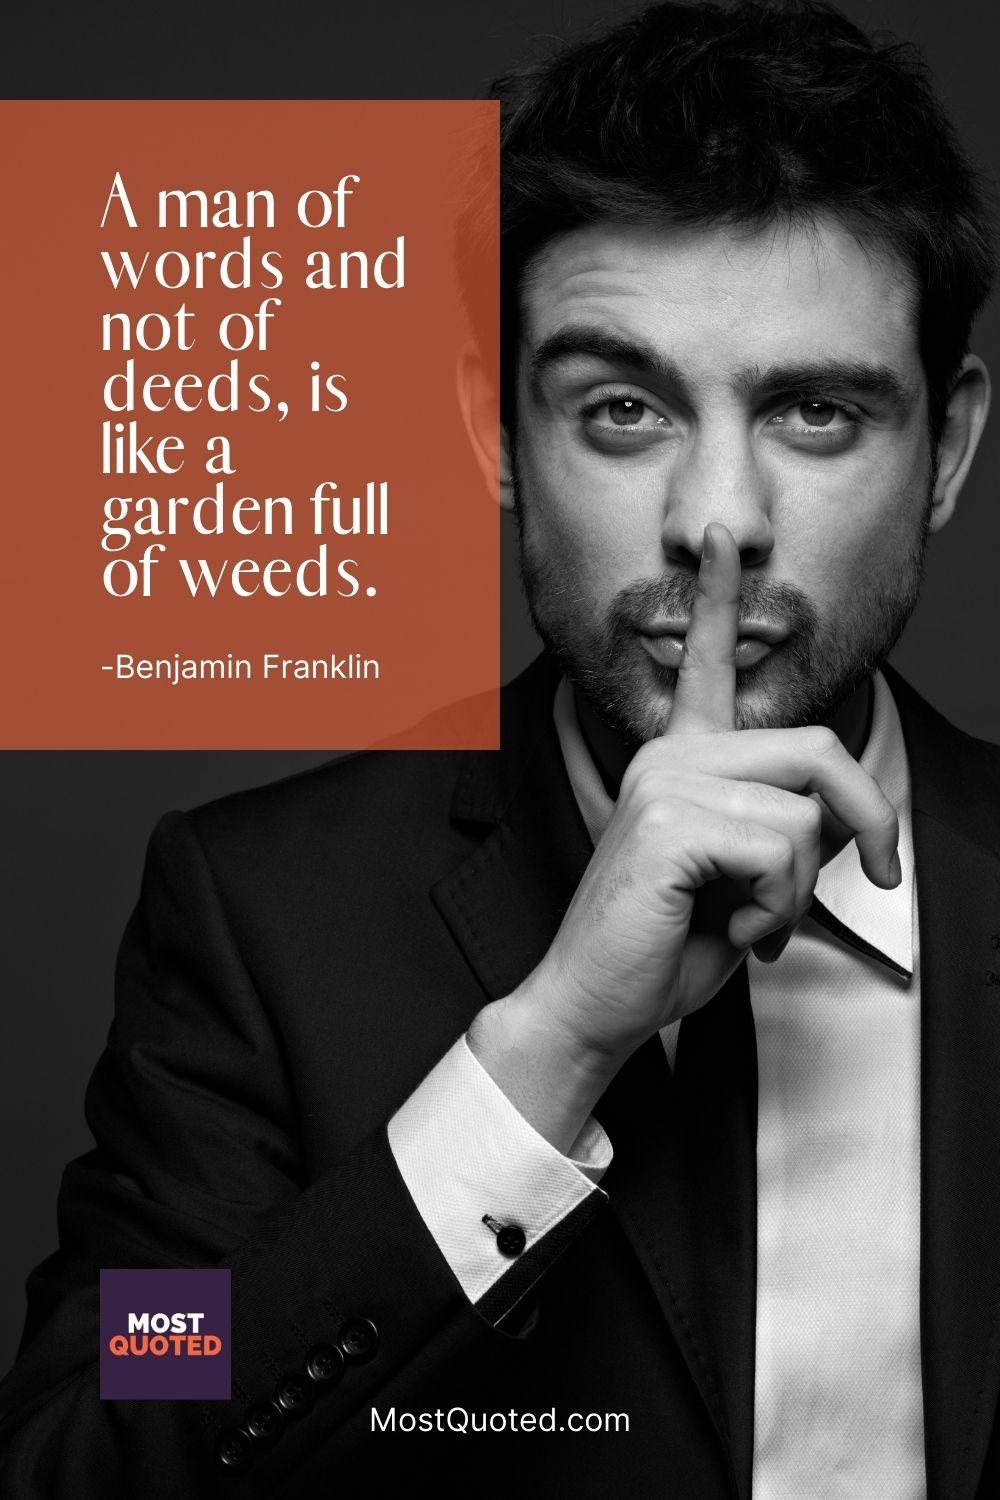 A man of words and not of deeds, is like a garden full of weeds. - Benjamin Franklin